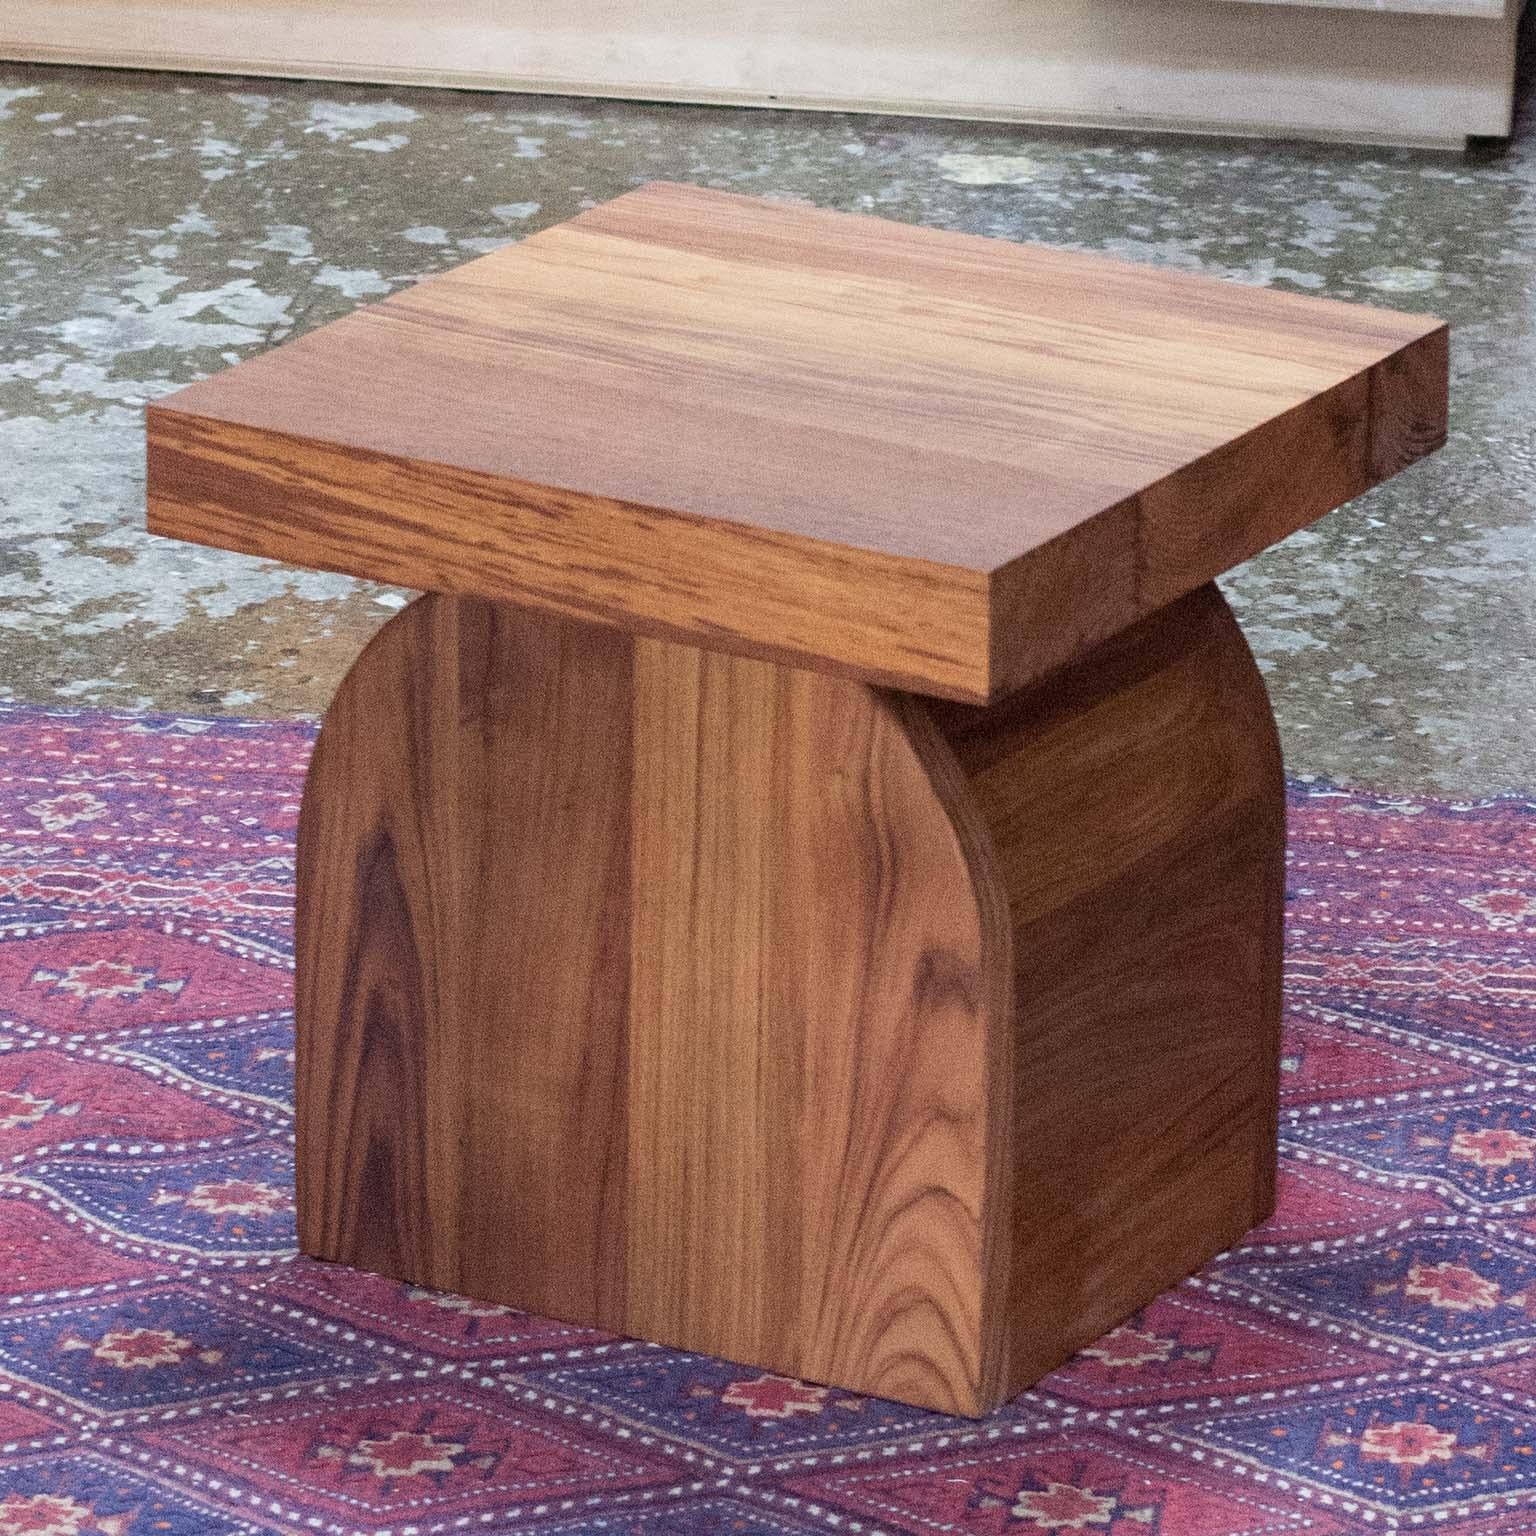 The Daphne stool is crafted of solid teak. 
This stool can be used in wet conditions such as showers, poolside, etc. 

The sleek lines of the top are complimented by the organically shaped, sturdy legs. 

Customers can specify dimensions, wood